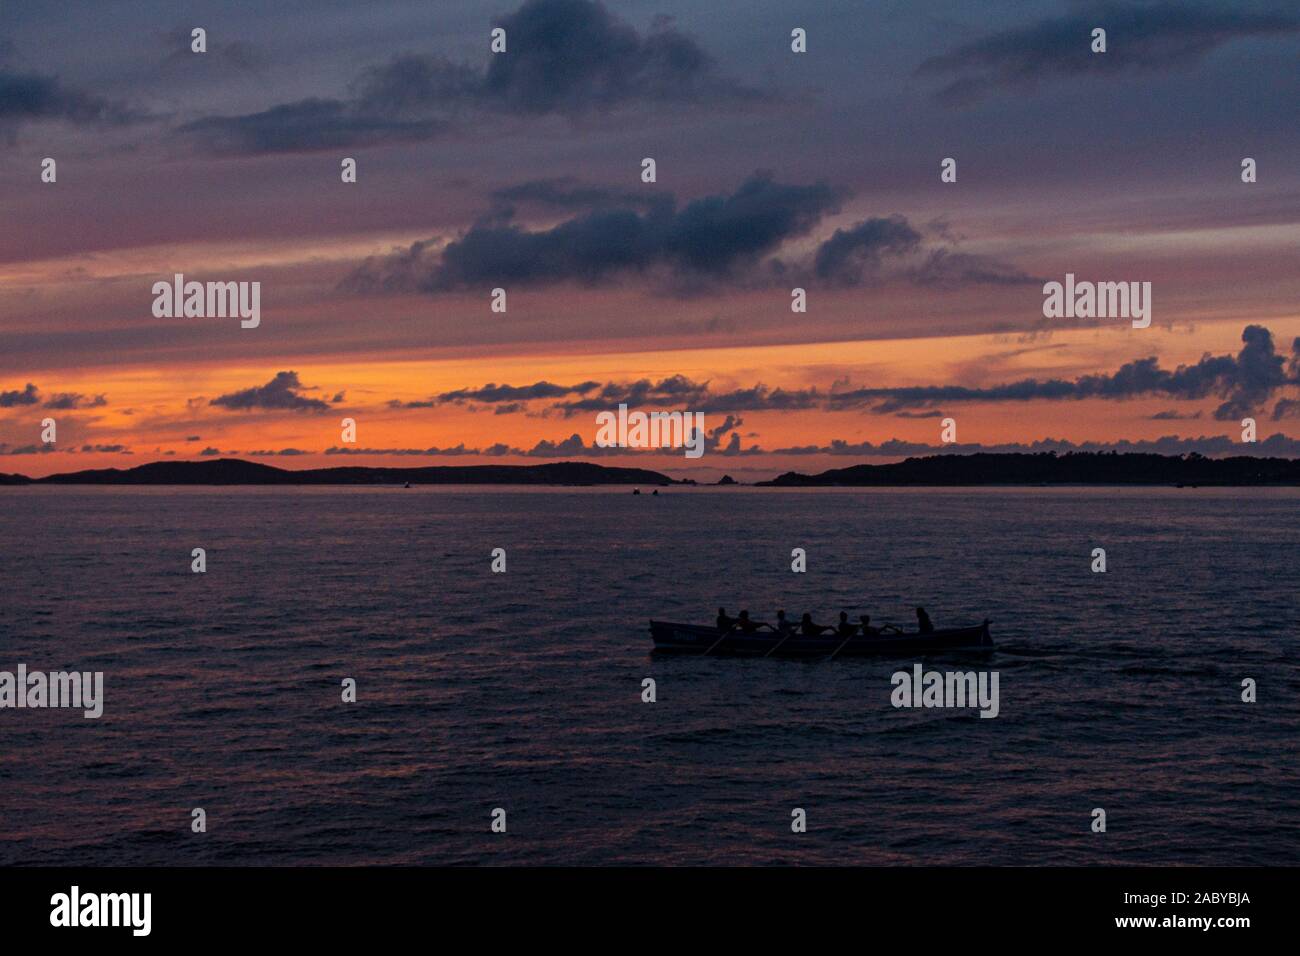 A Cornish pilot gig boat being rowed between the Isles of Scilly at sunset Stock Photo